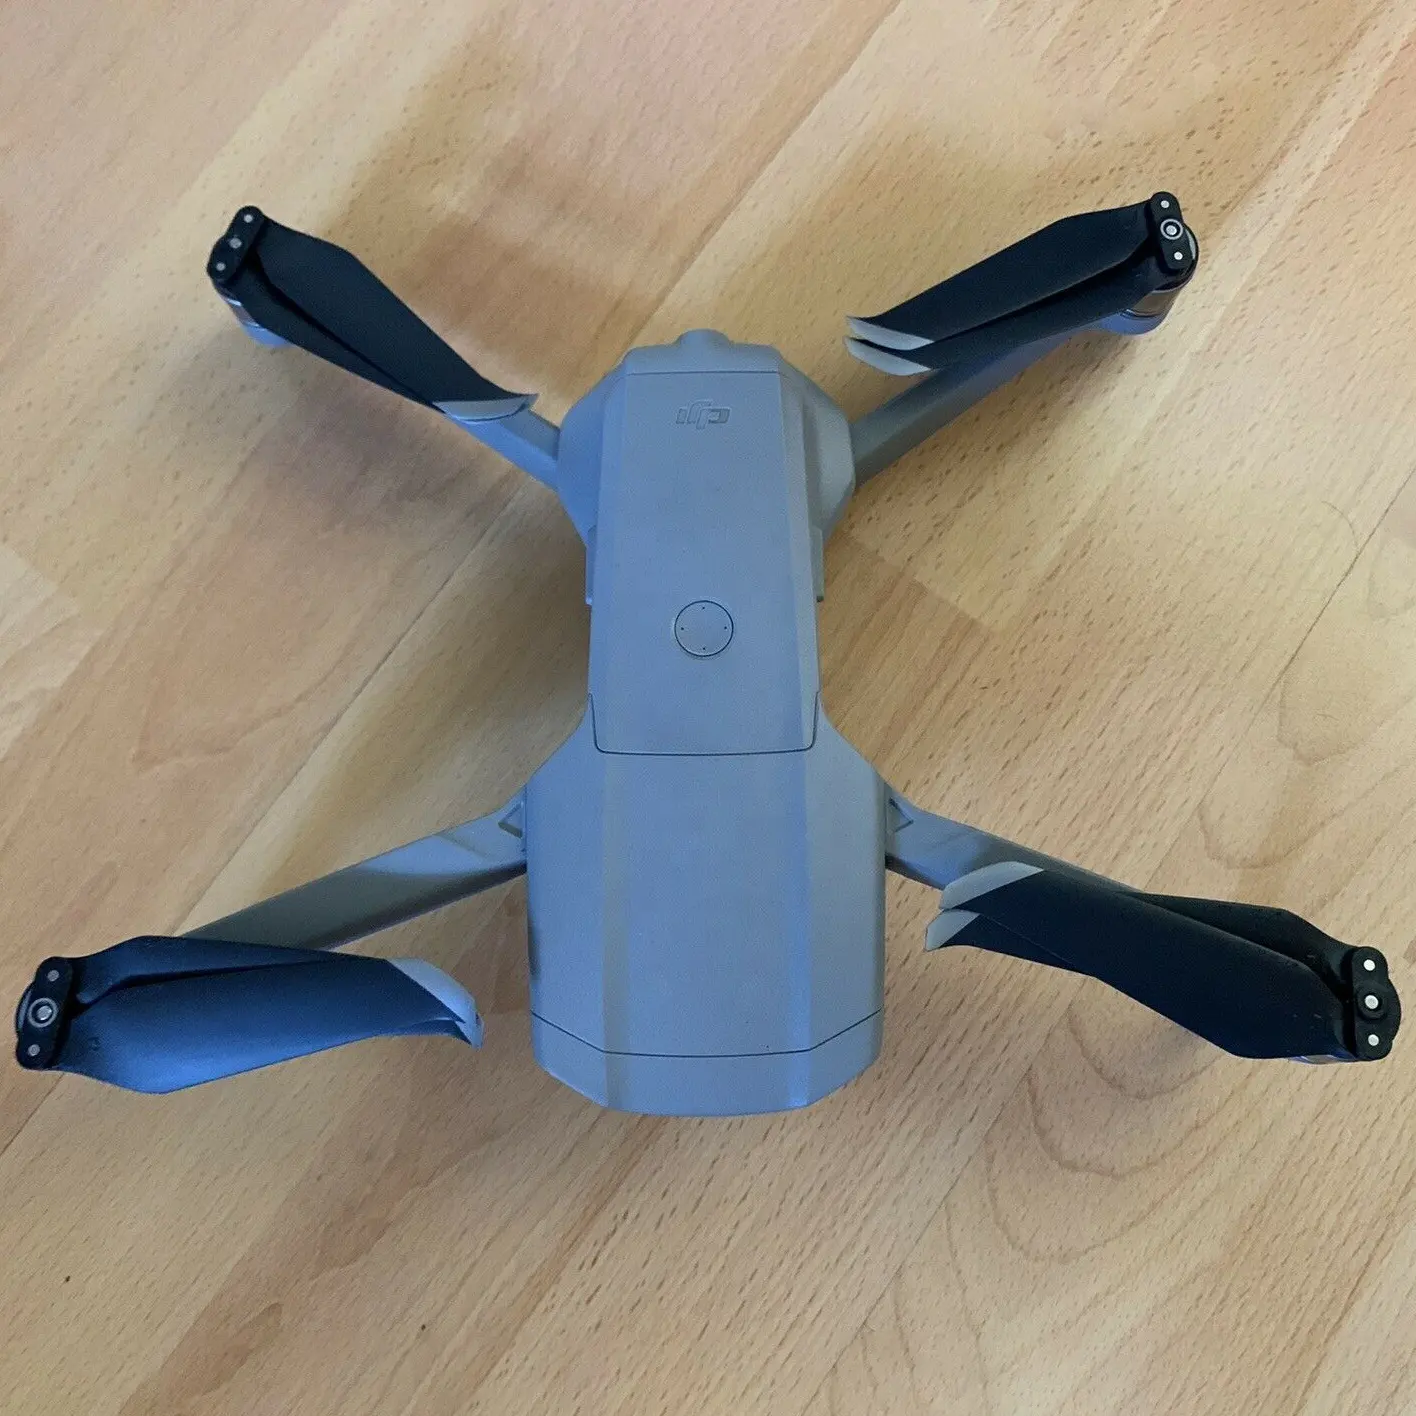 Best price for 100% Original and New for DJI Mavic Air 2 Fly More Combo